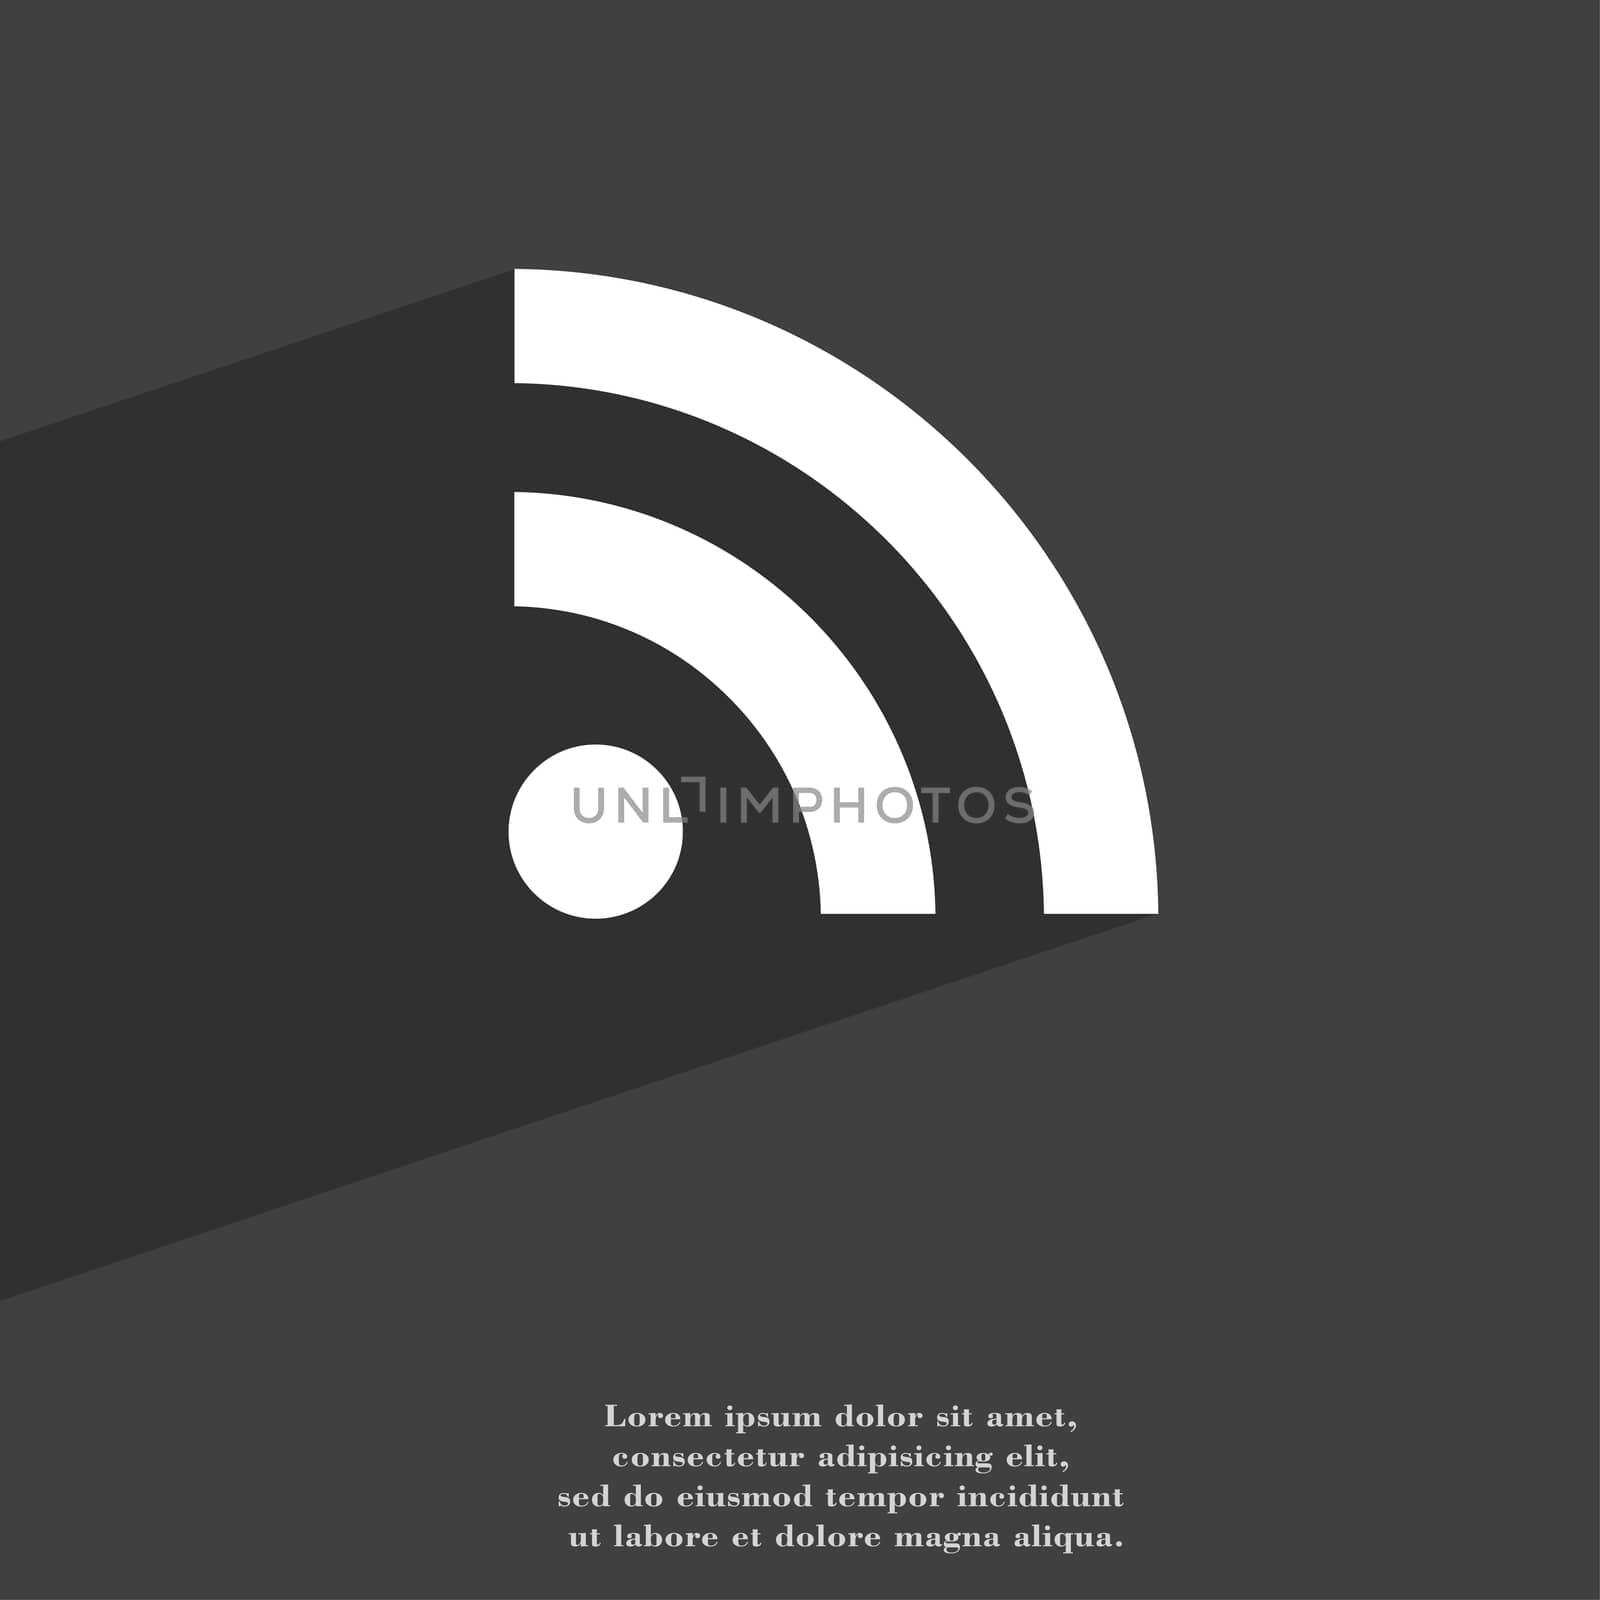 RSS feed icon symbol Flat modern web design with long shadow and space for your text. illustration